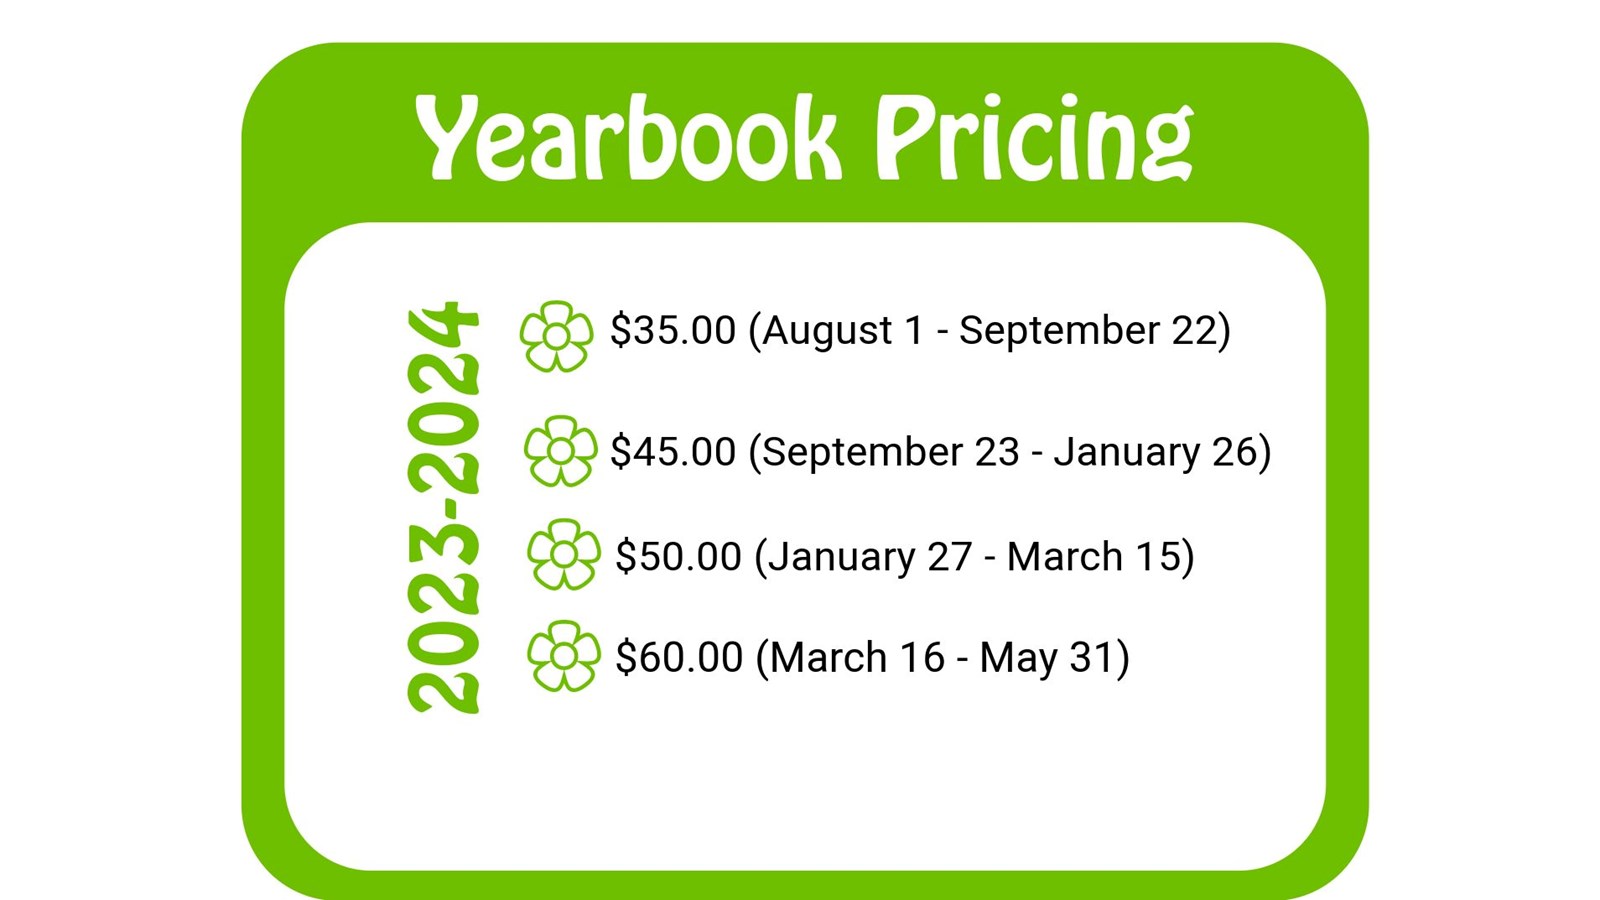 Yearbook Pricing